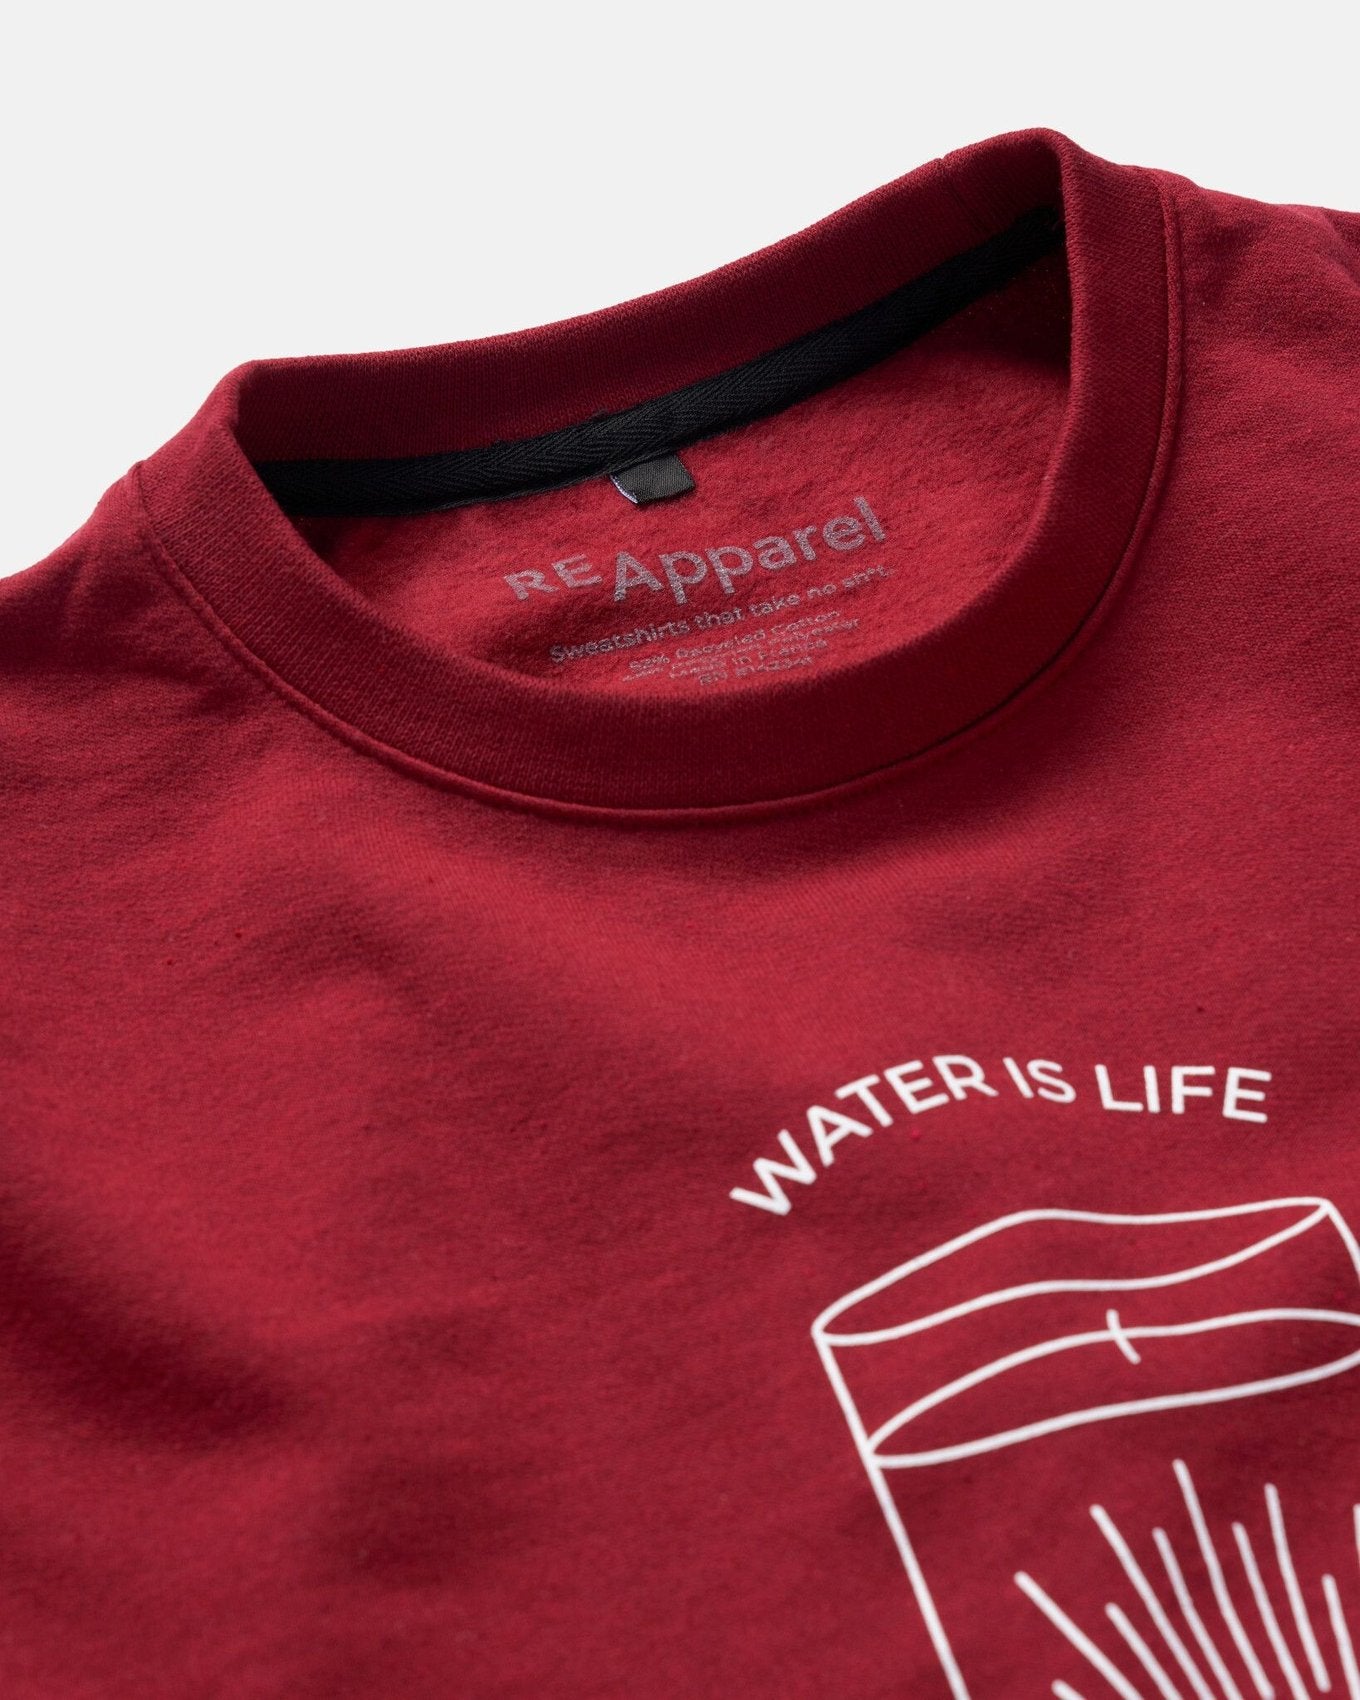 ReApparel Water Crew Neck . in color Garnet and shape long sleeve